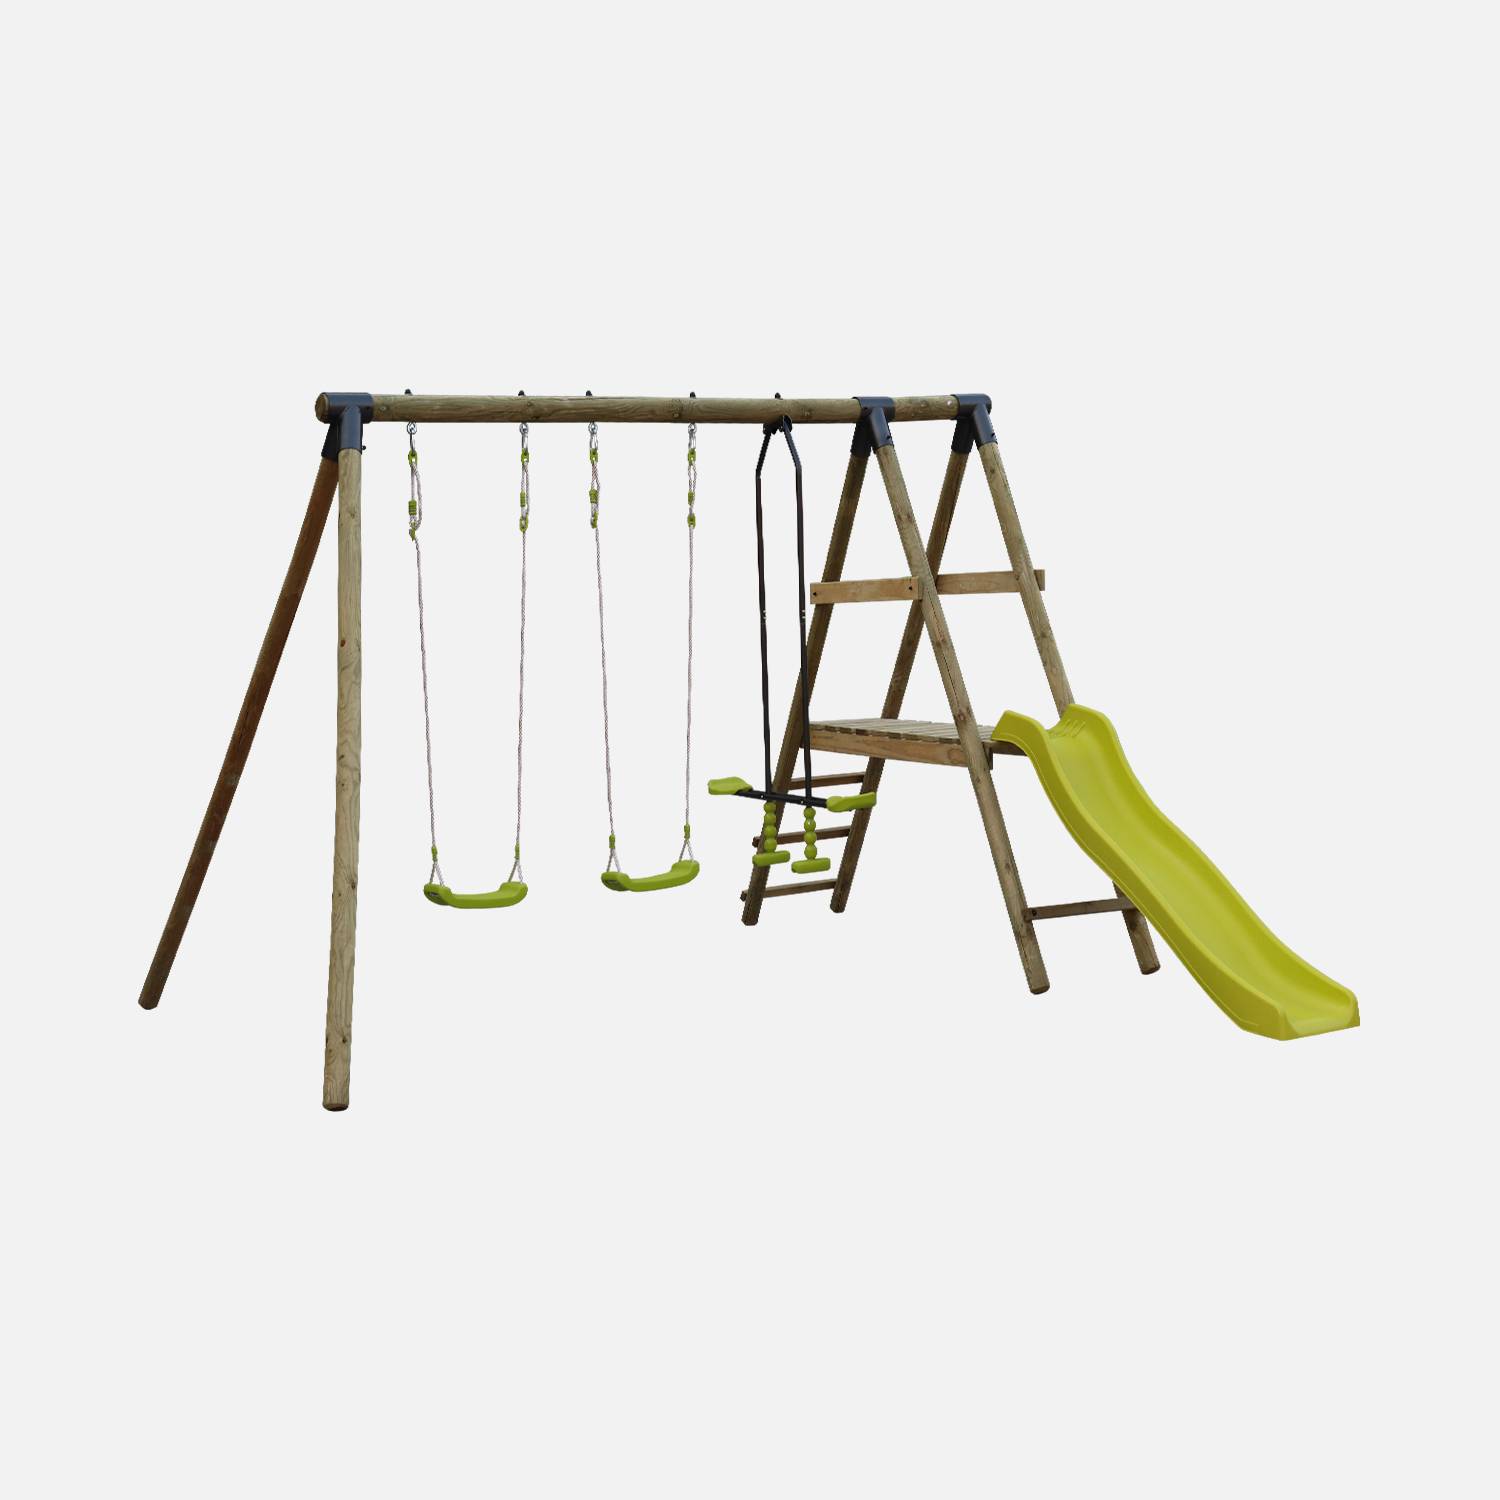 Wooden garden multiplay with slide, two swings and face to face glider - pressure treated FSC pine - Marin,sweeek,Photo1